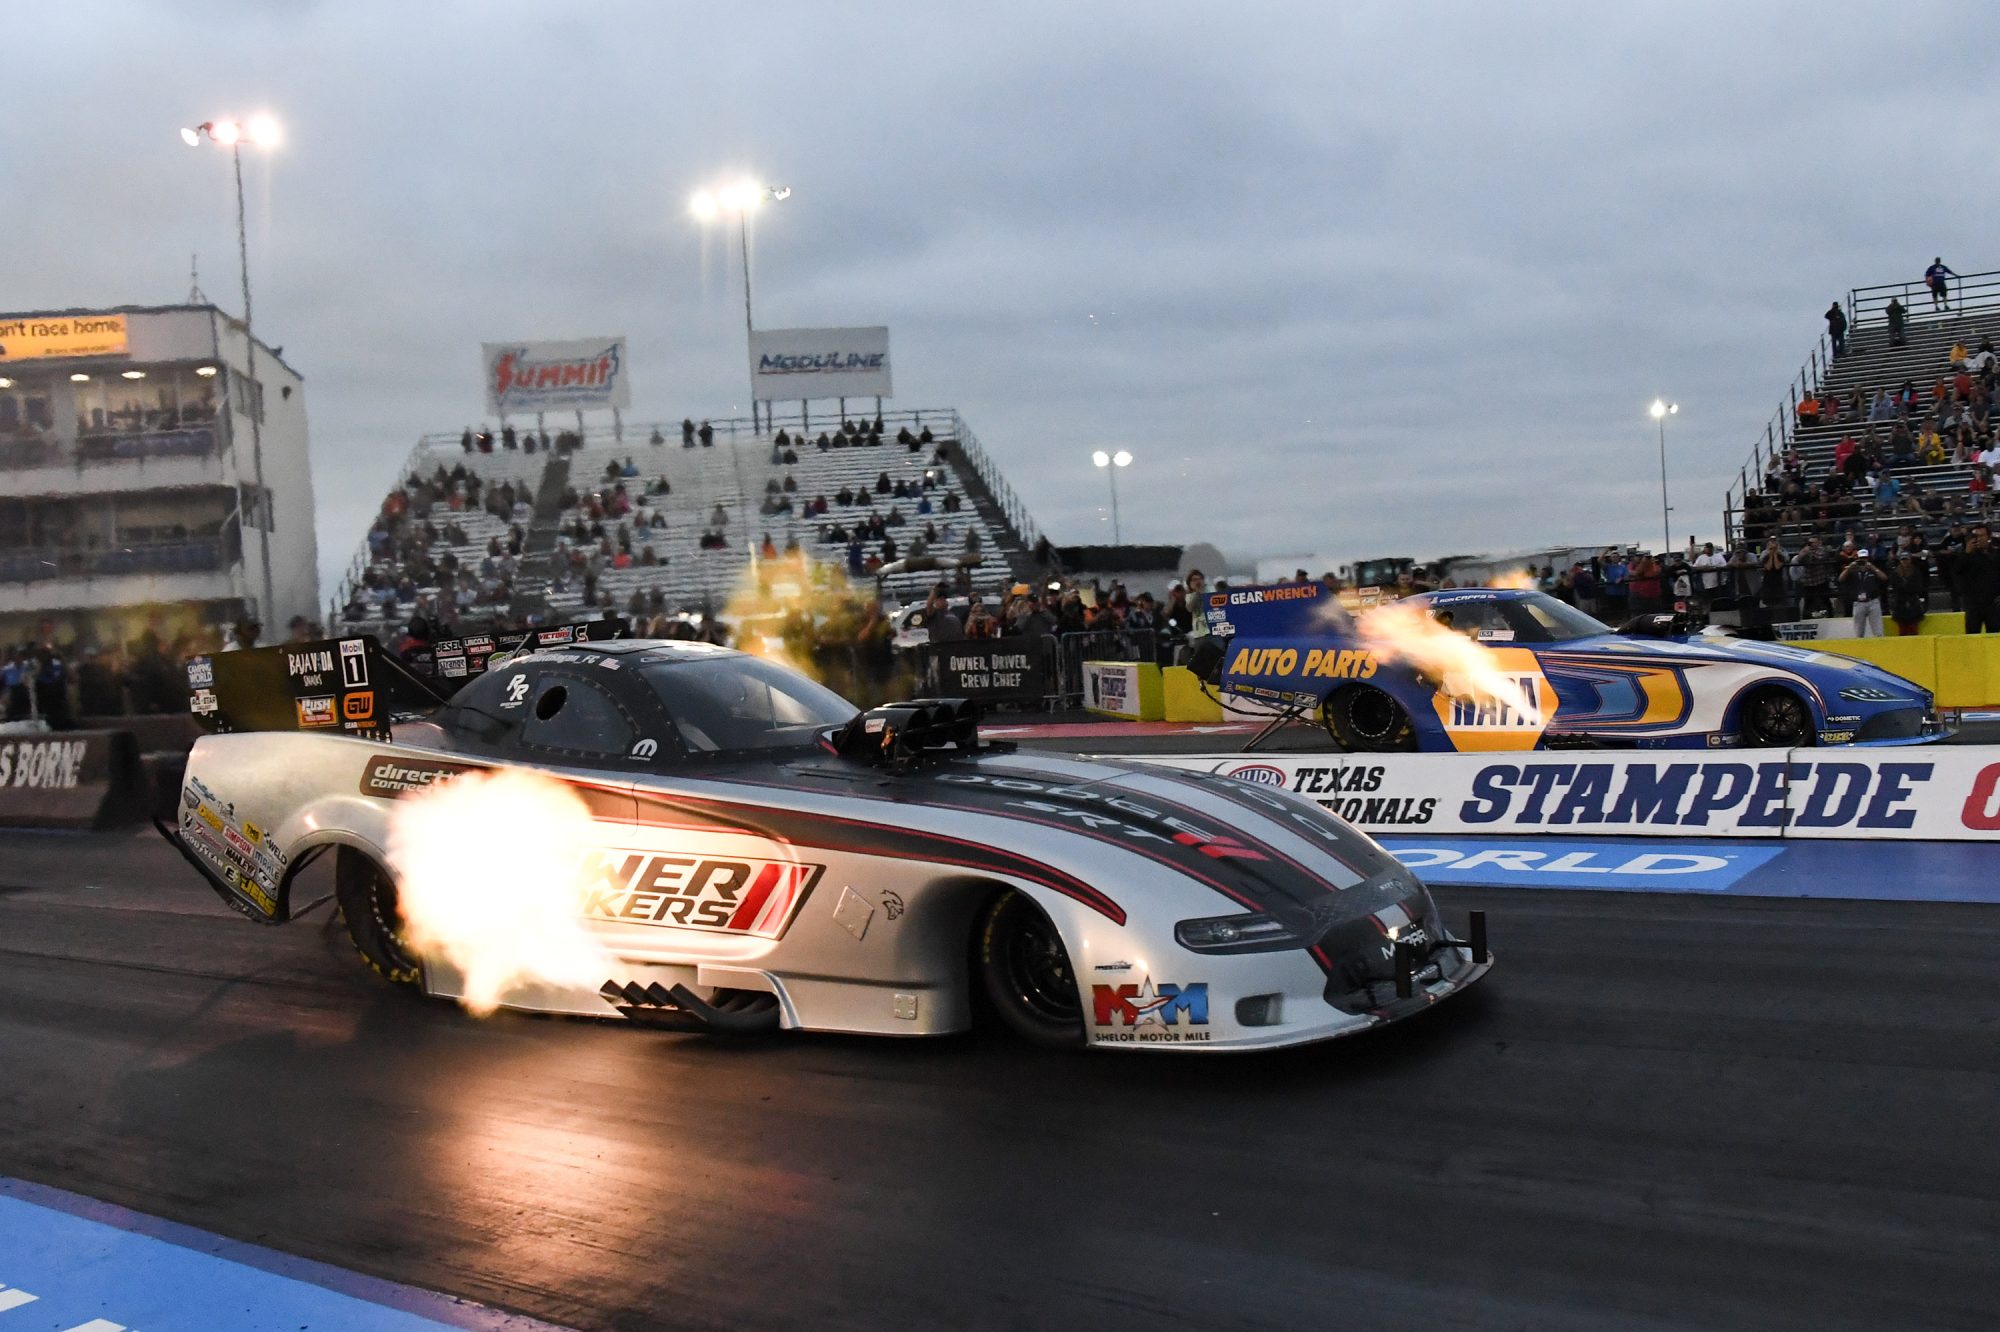 Charging into Funny Car history